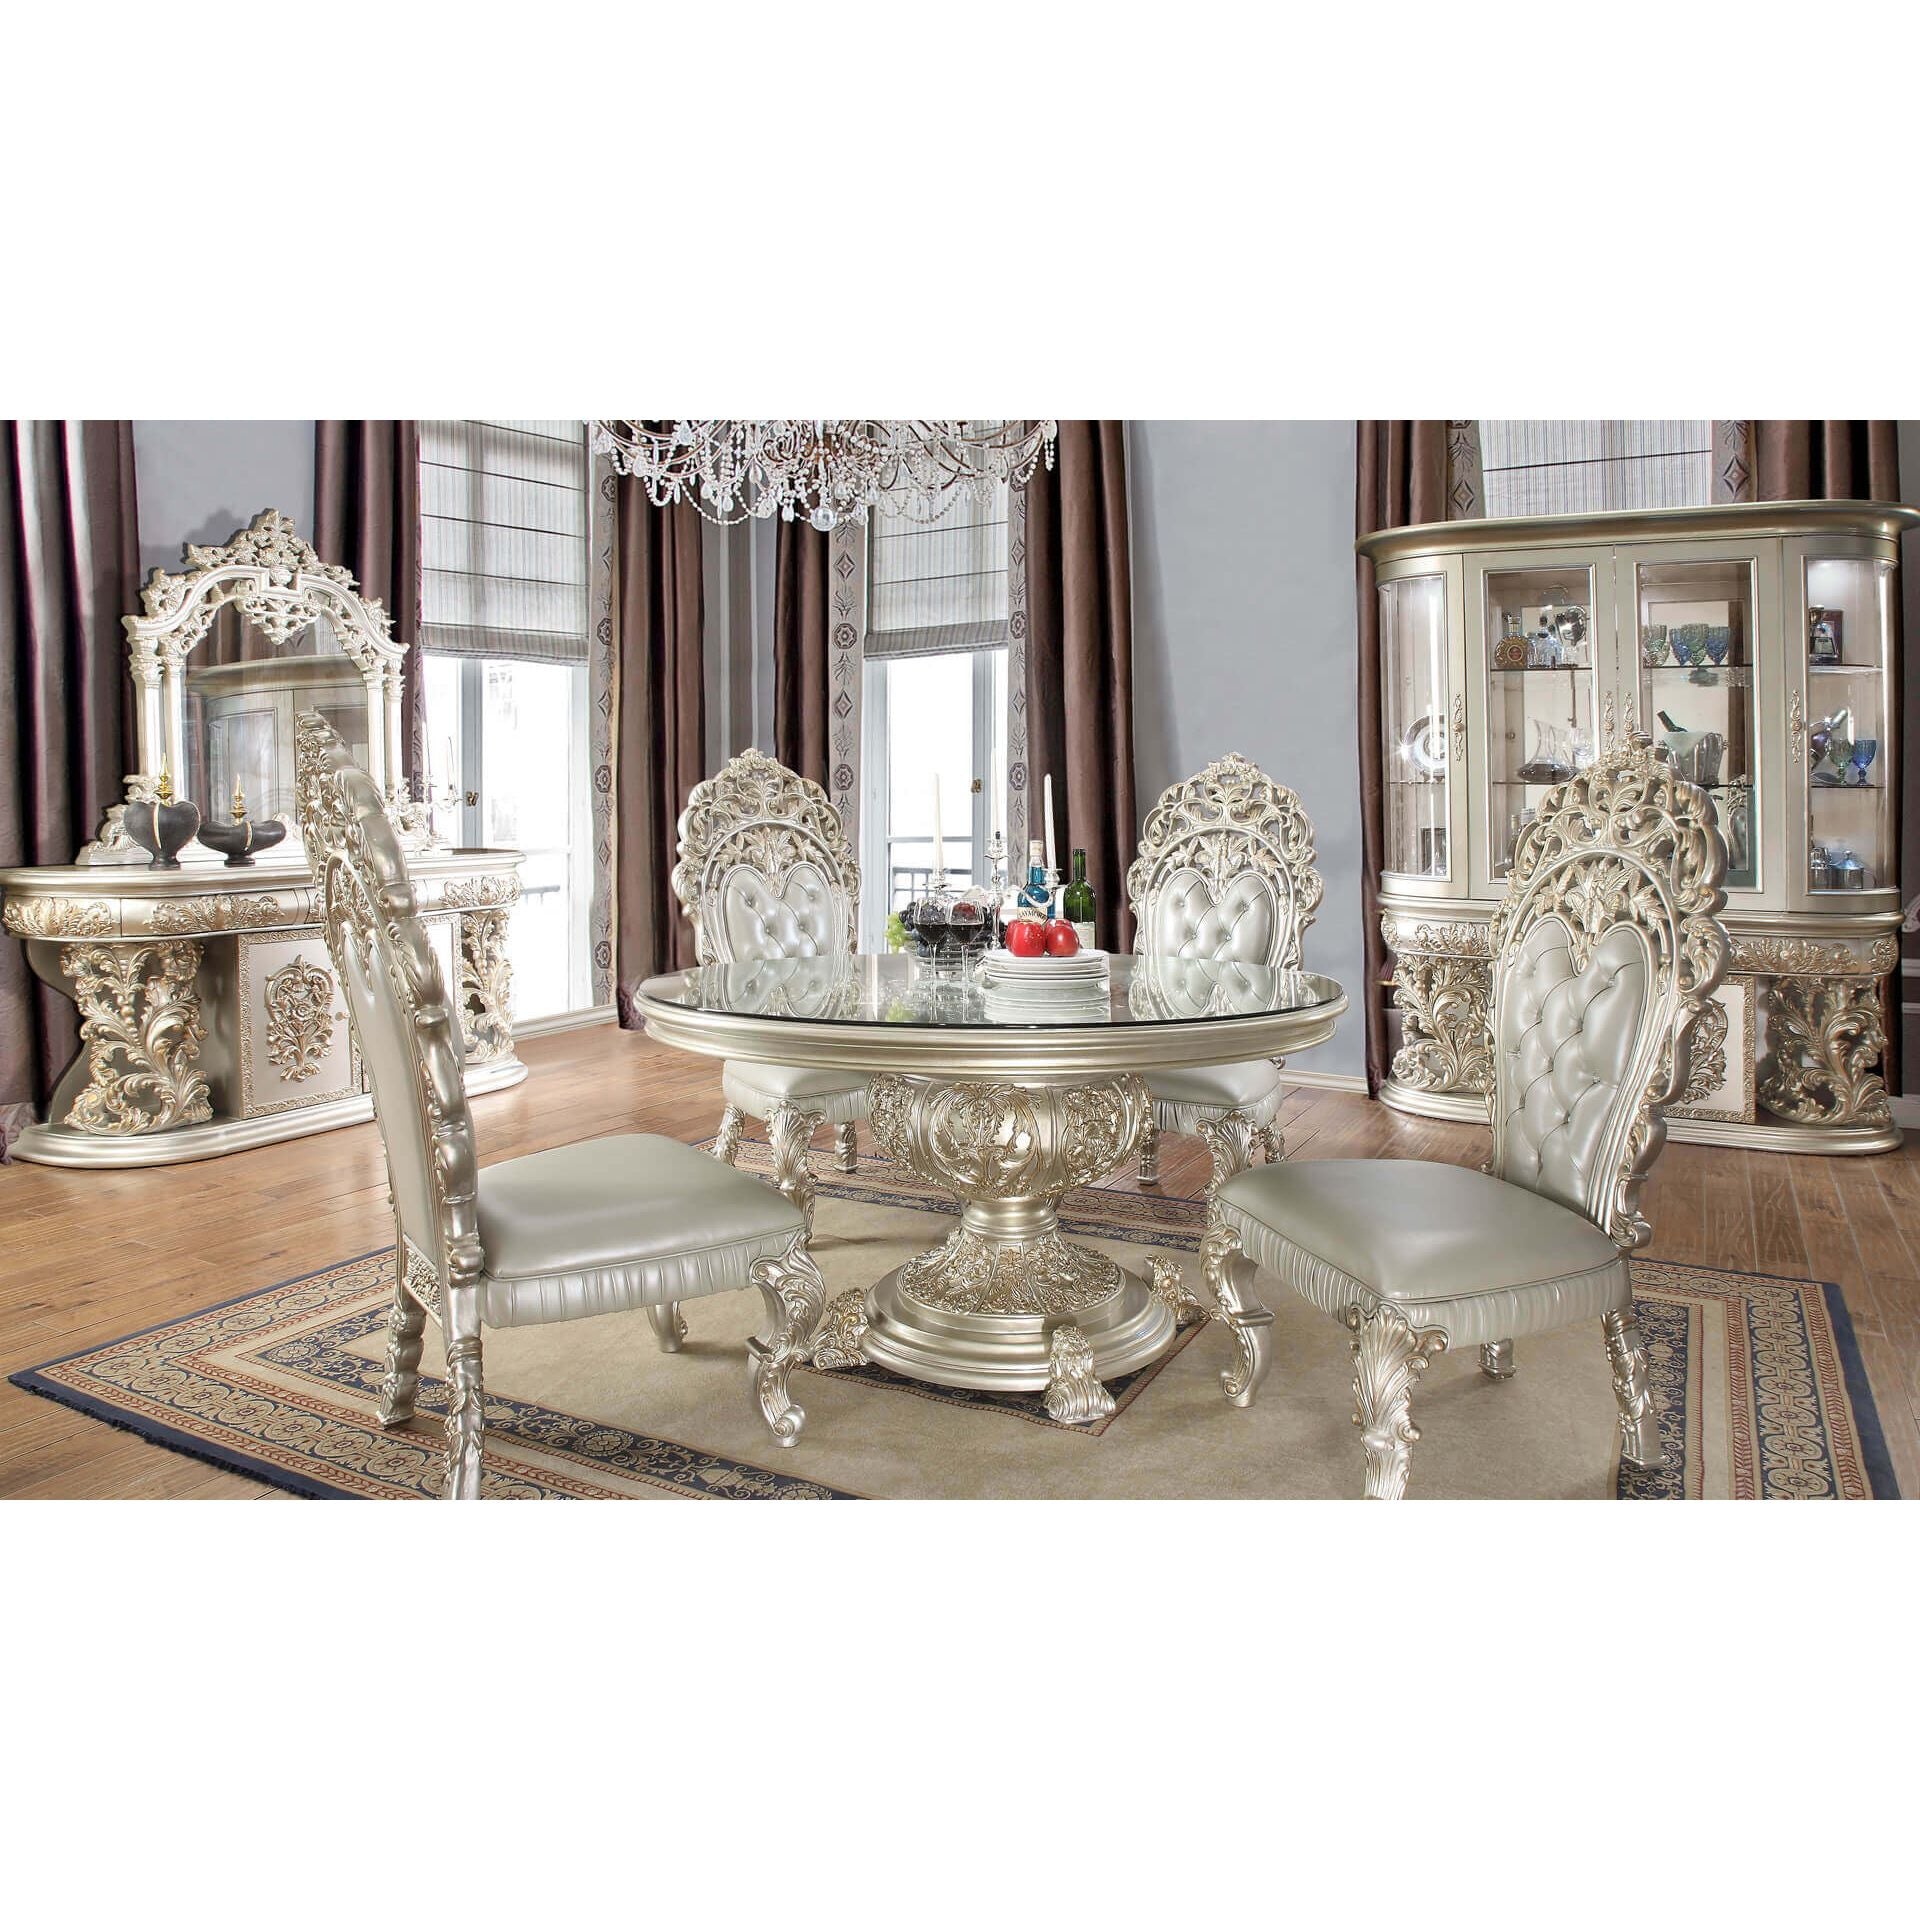 Homey Design HD-8088 - 5PC DINING TABLE SET - New Star Living